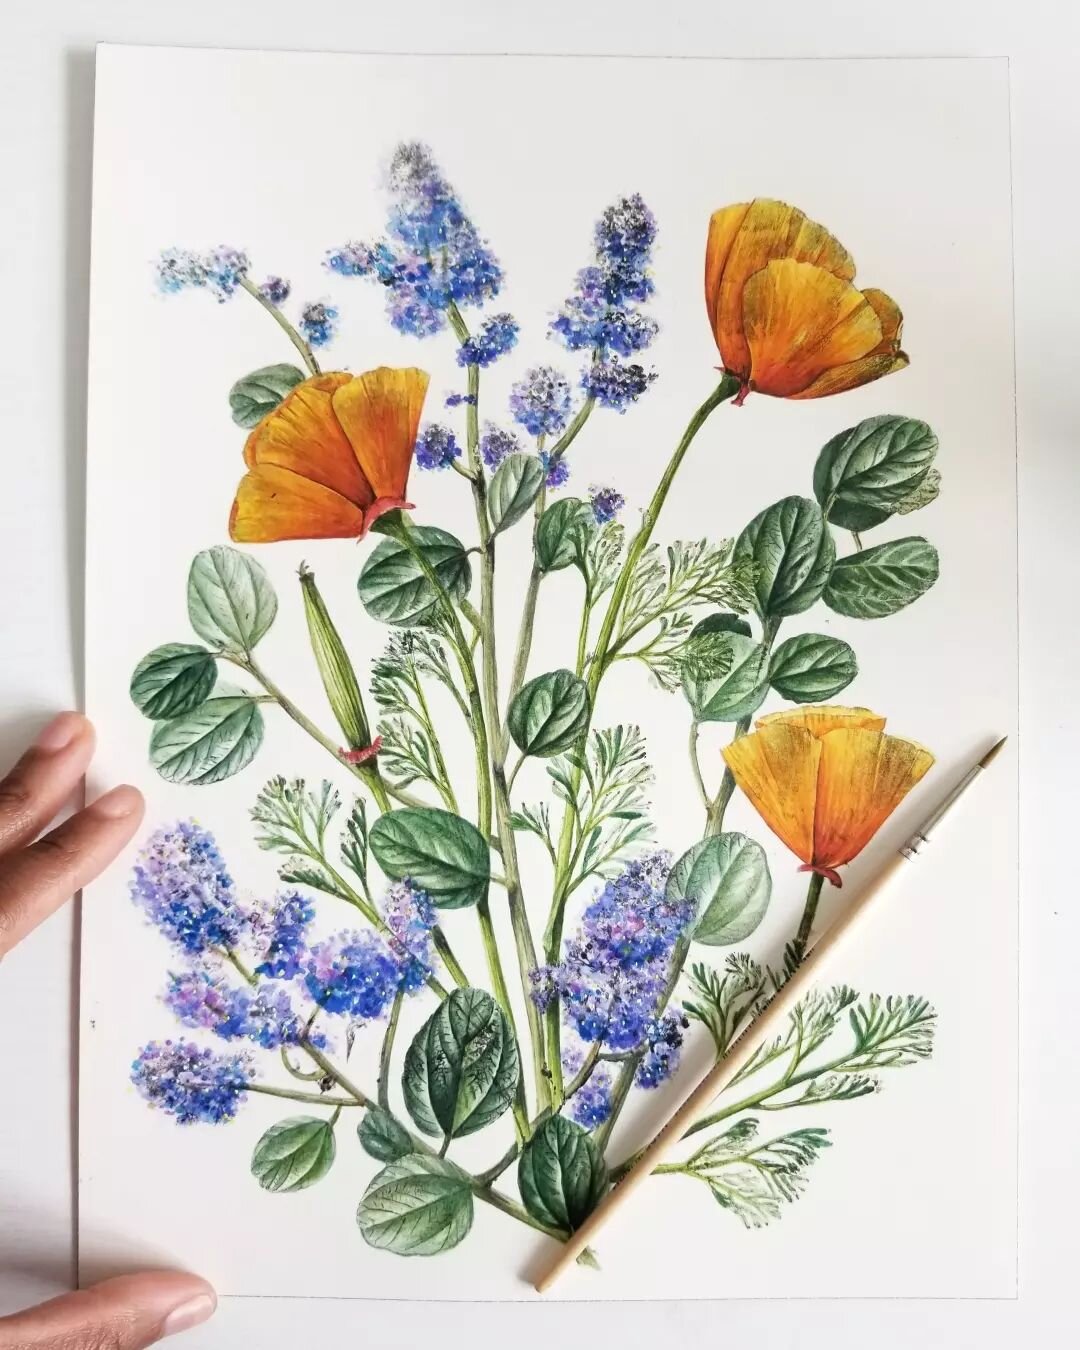 Time to scan and make prints!
If you would like one, DM me to let me knoooow! (Sorry only shipping within the US at this time)

California Poppy and California Lilac
Eschscholzia californica and Ceanothus so.
.
.
#natureprinting #natureprint #printsf